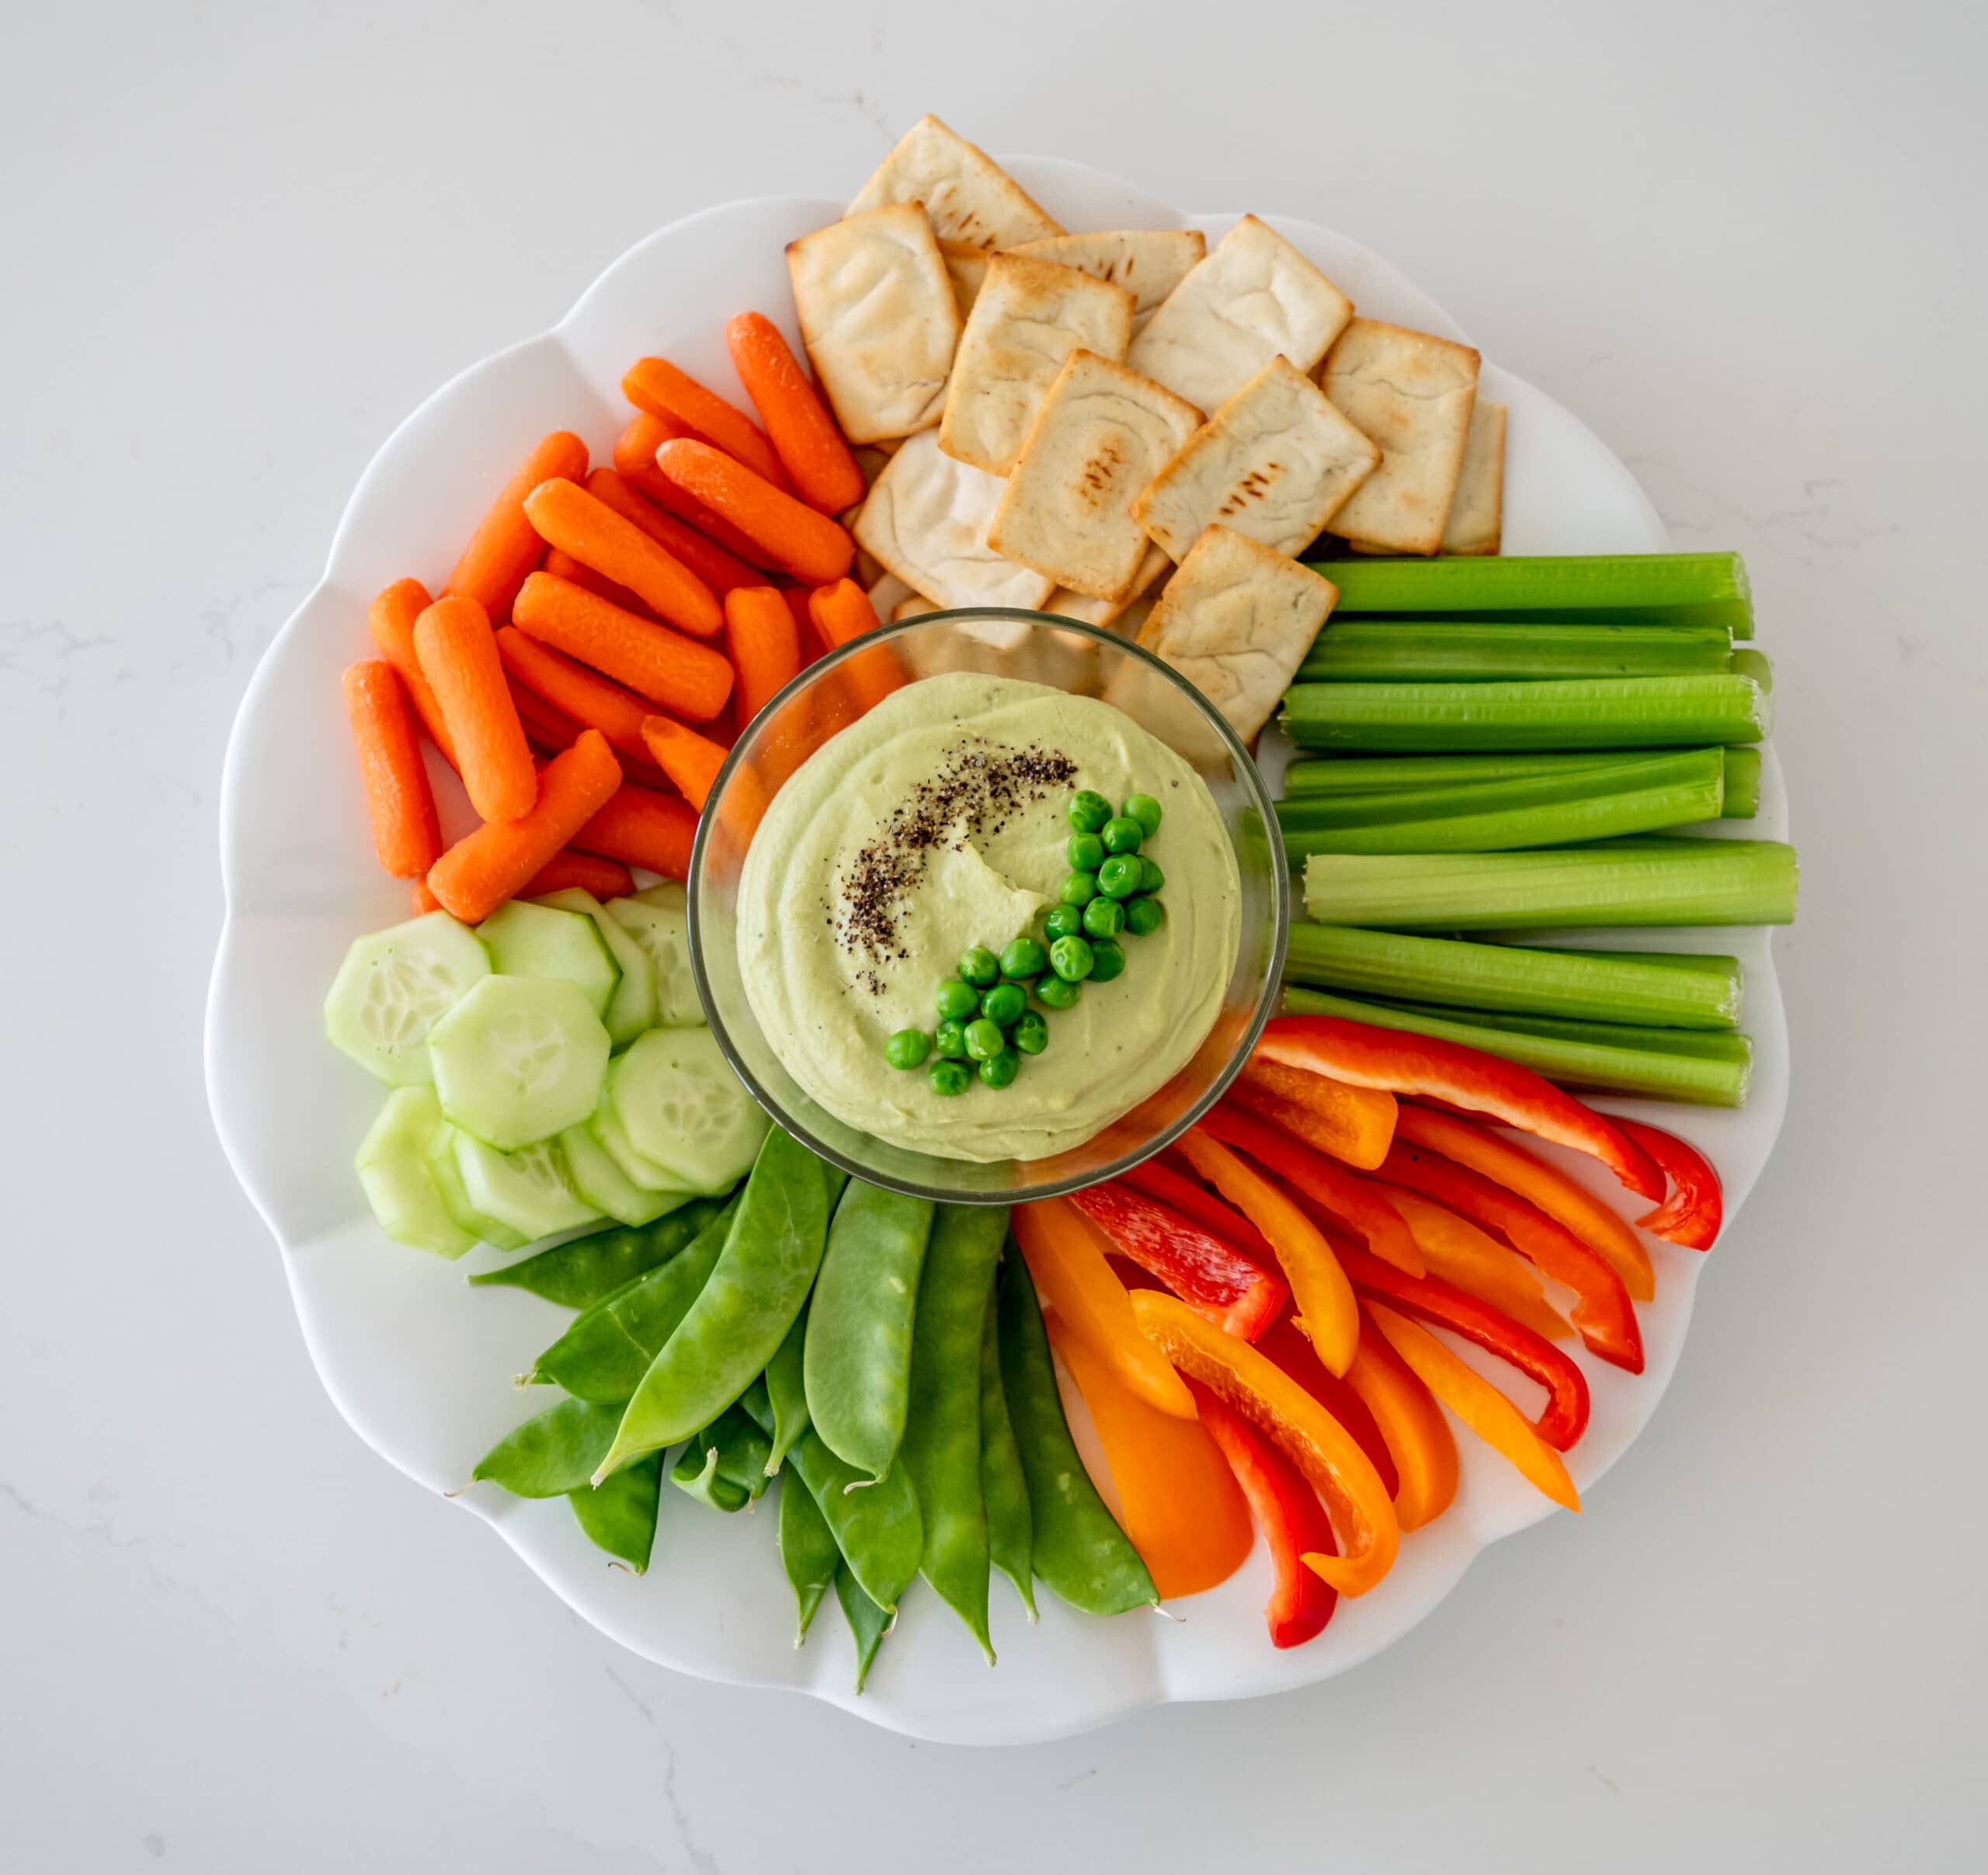 Green pea hummus in the center of a white plate surrounded by veggies and pita chips.